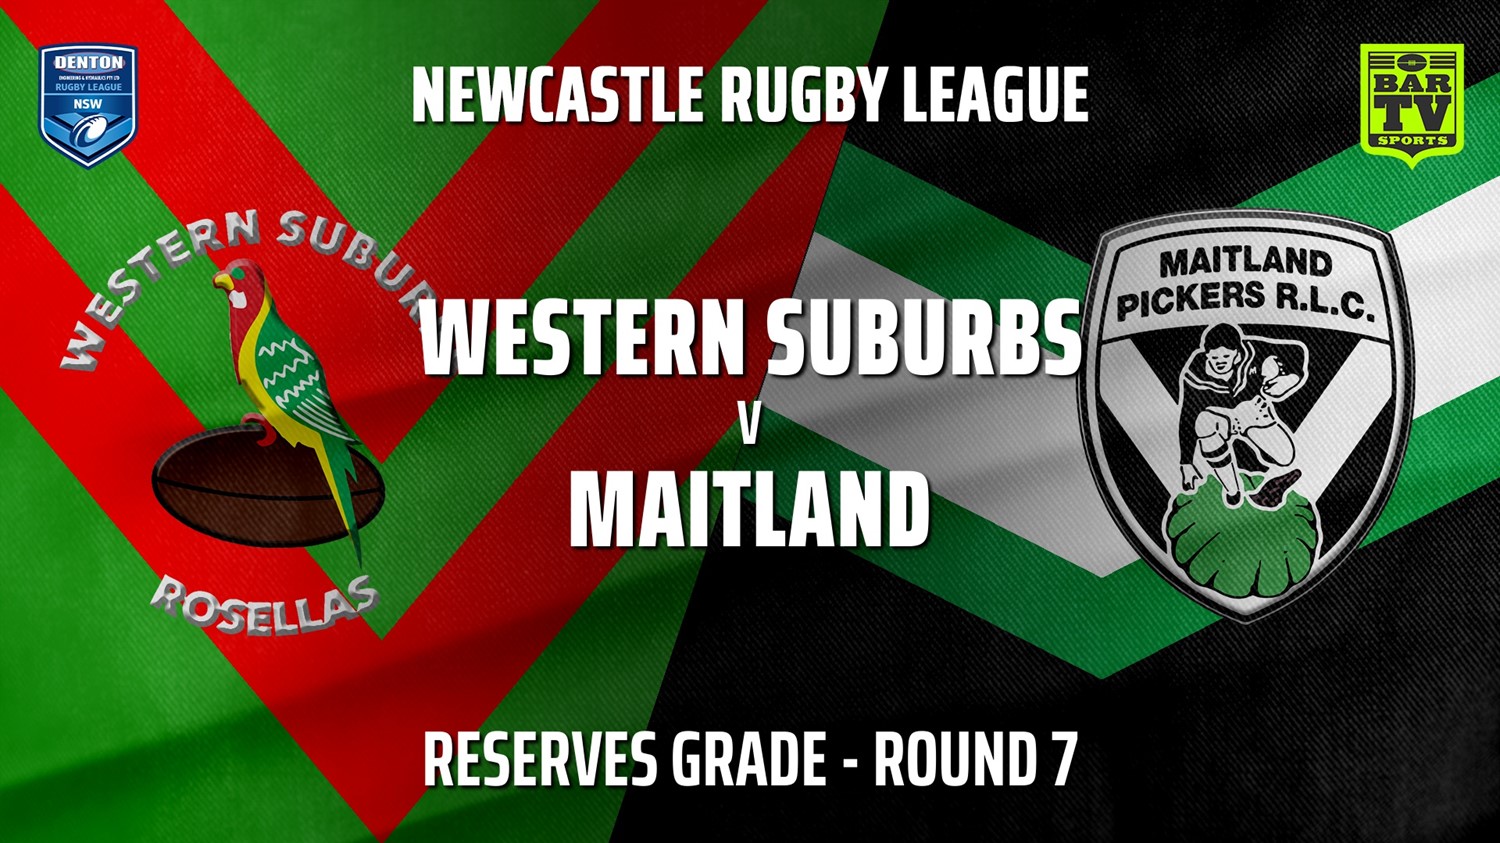 210508-Newcastle Rugby League Round 7 - Reserves Grade - Western Suburbs Rosellas v Maitland Pickers Slate Image